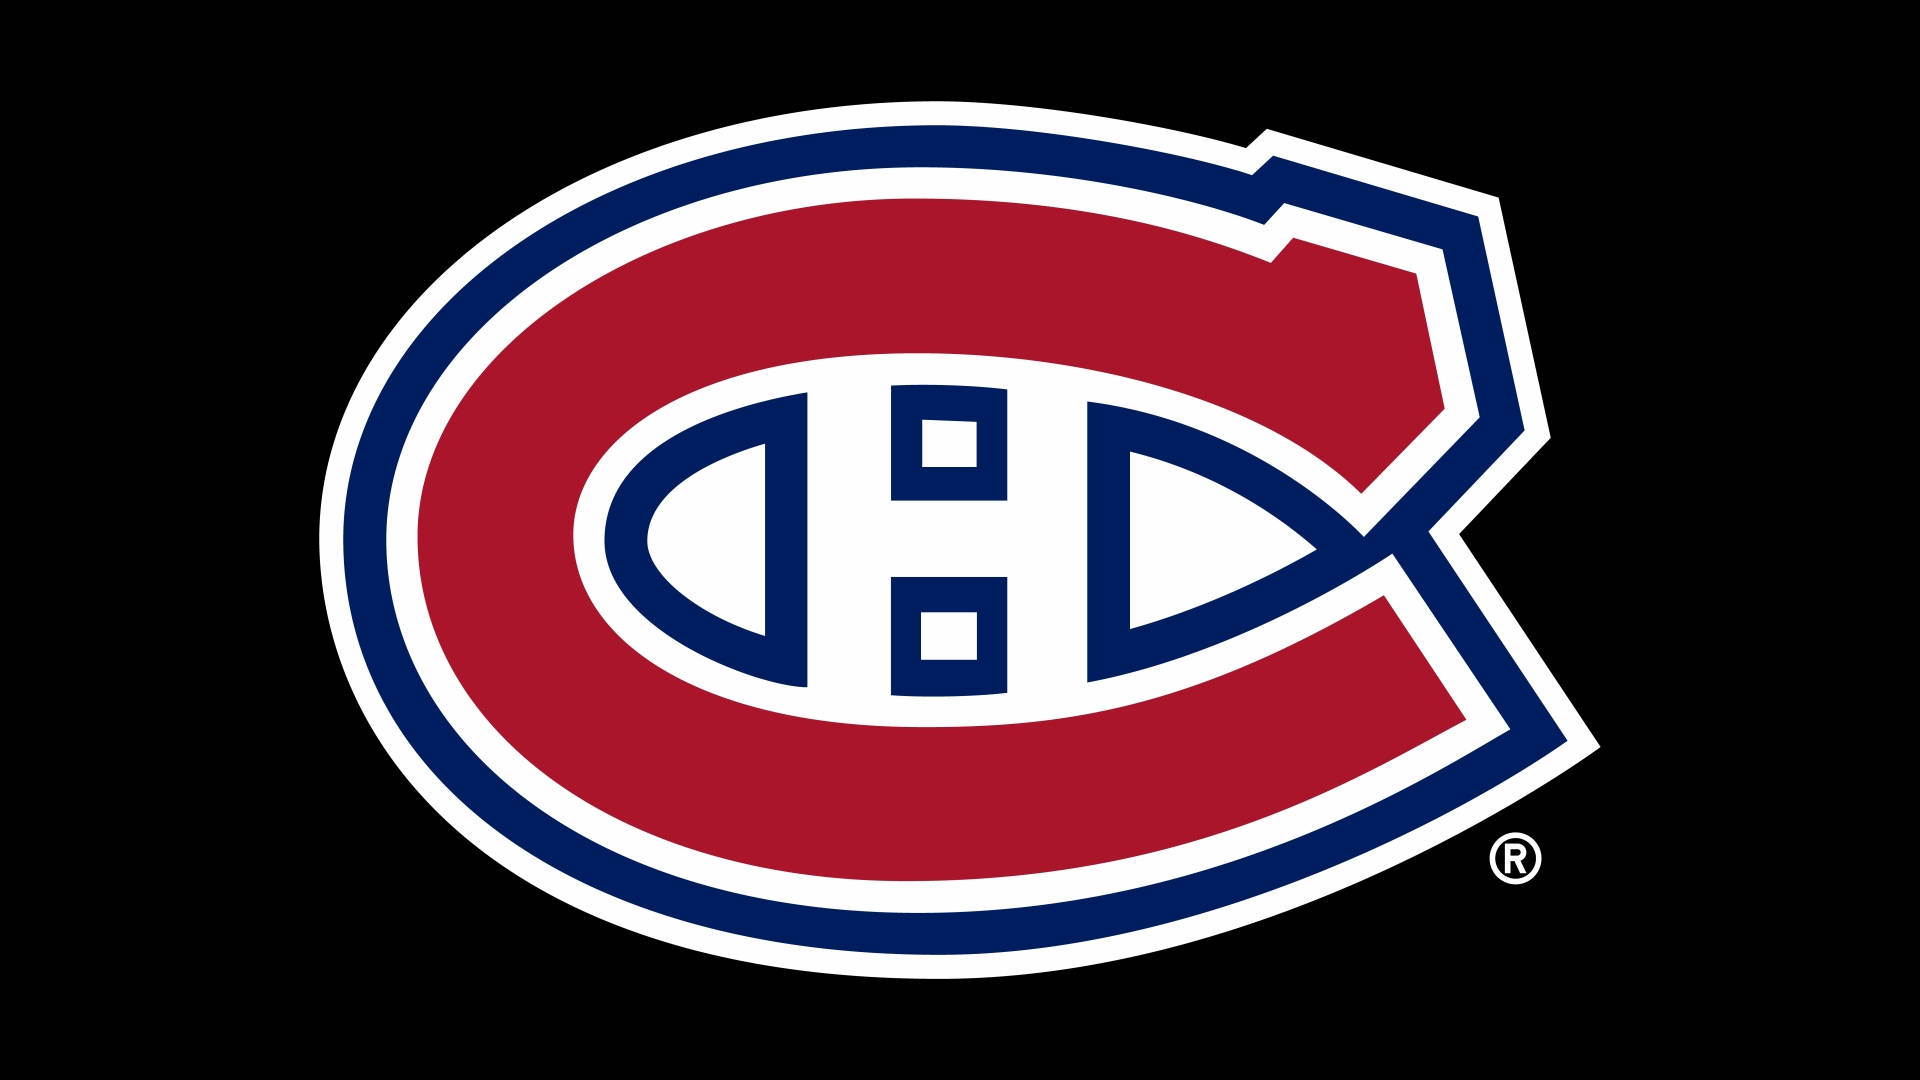 Montreal Canadiens Logo In Black Background